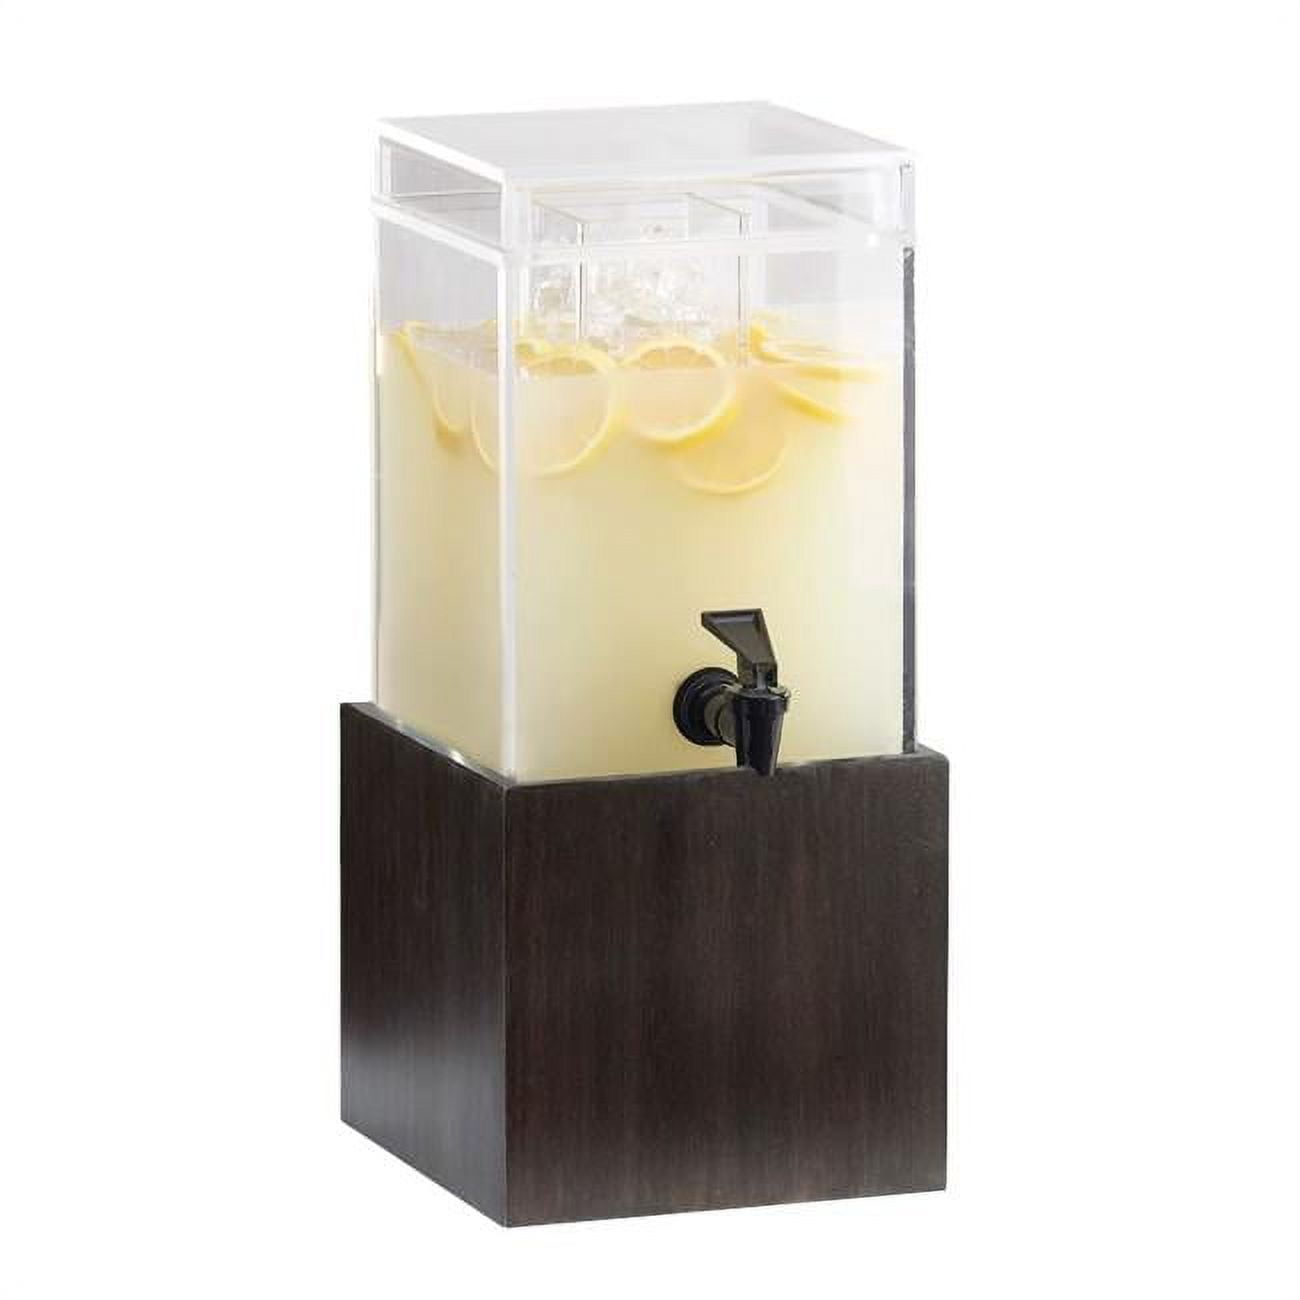 Picture of Cal Mil 1527-1-96 1.5 gal Midnight Bamboo Beverage Dispenser - 8.125 x 9.75 x 17.75 in.